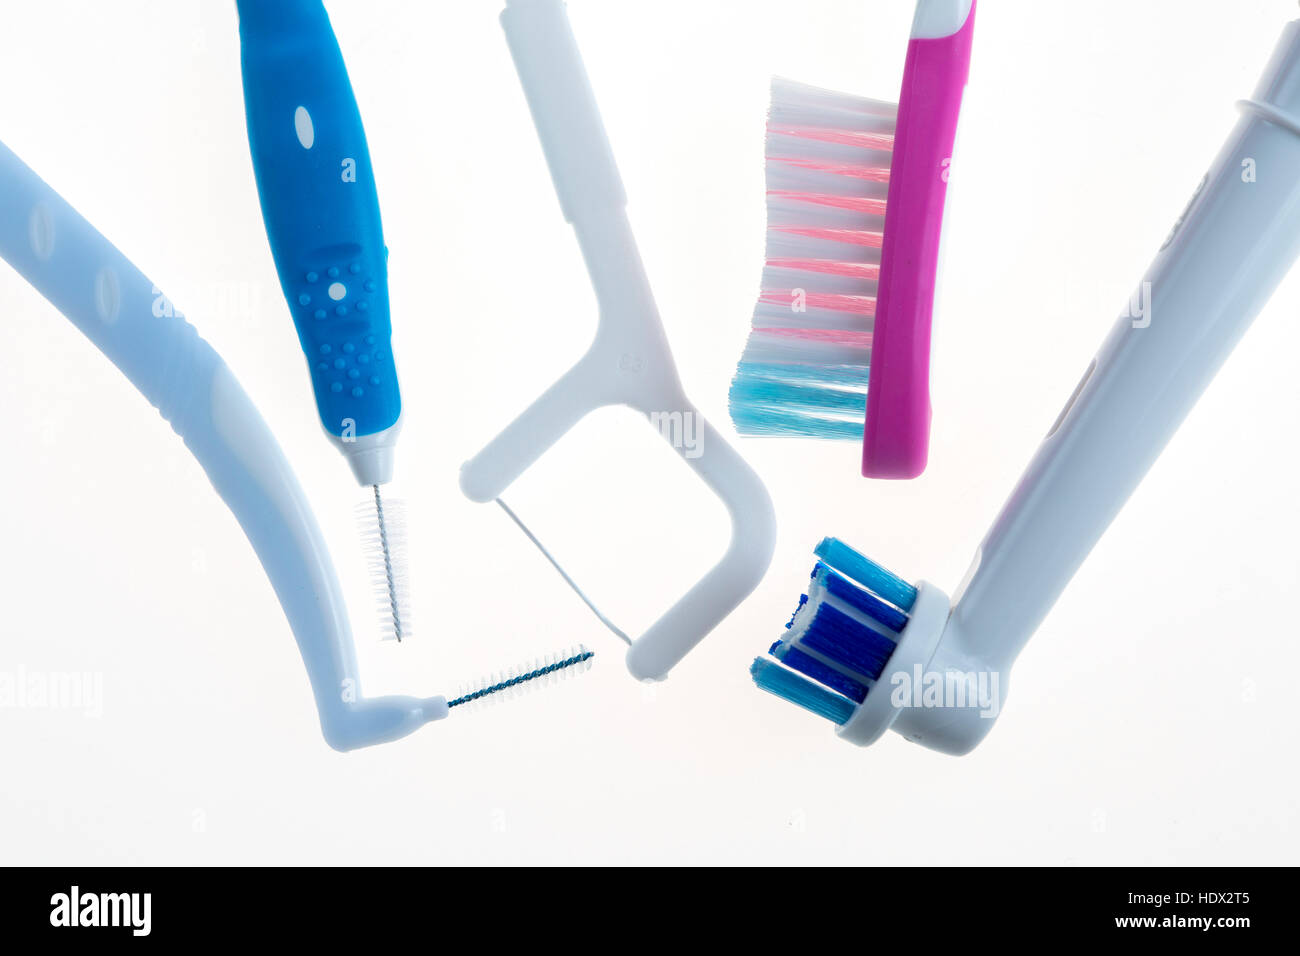 Dental hygiene products, toothbrush, toothpick, electrical toothbrush, interdentalbrush, dental floss, tongue cleaner, Stock Photo